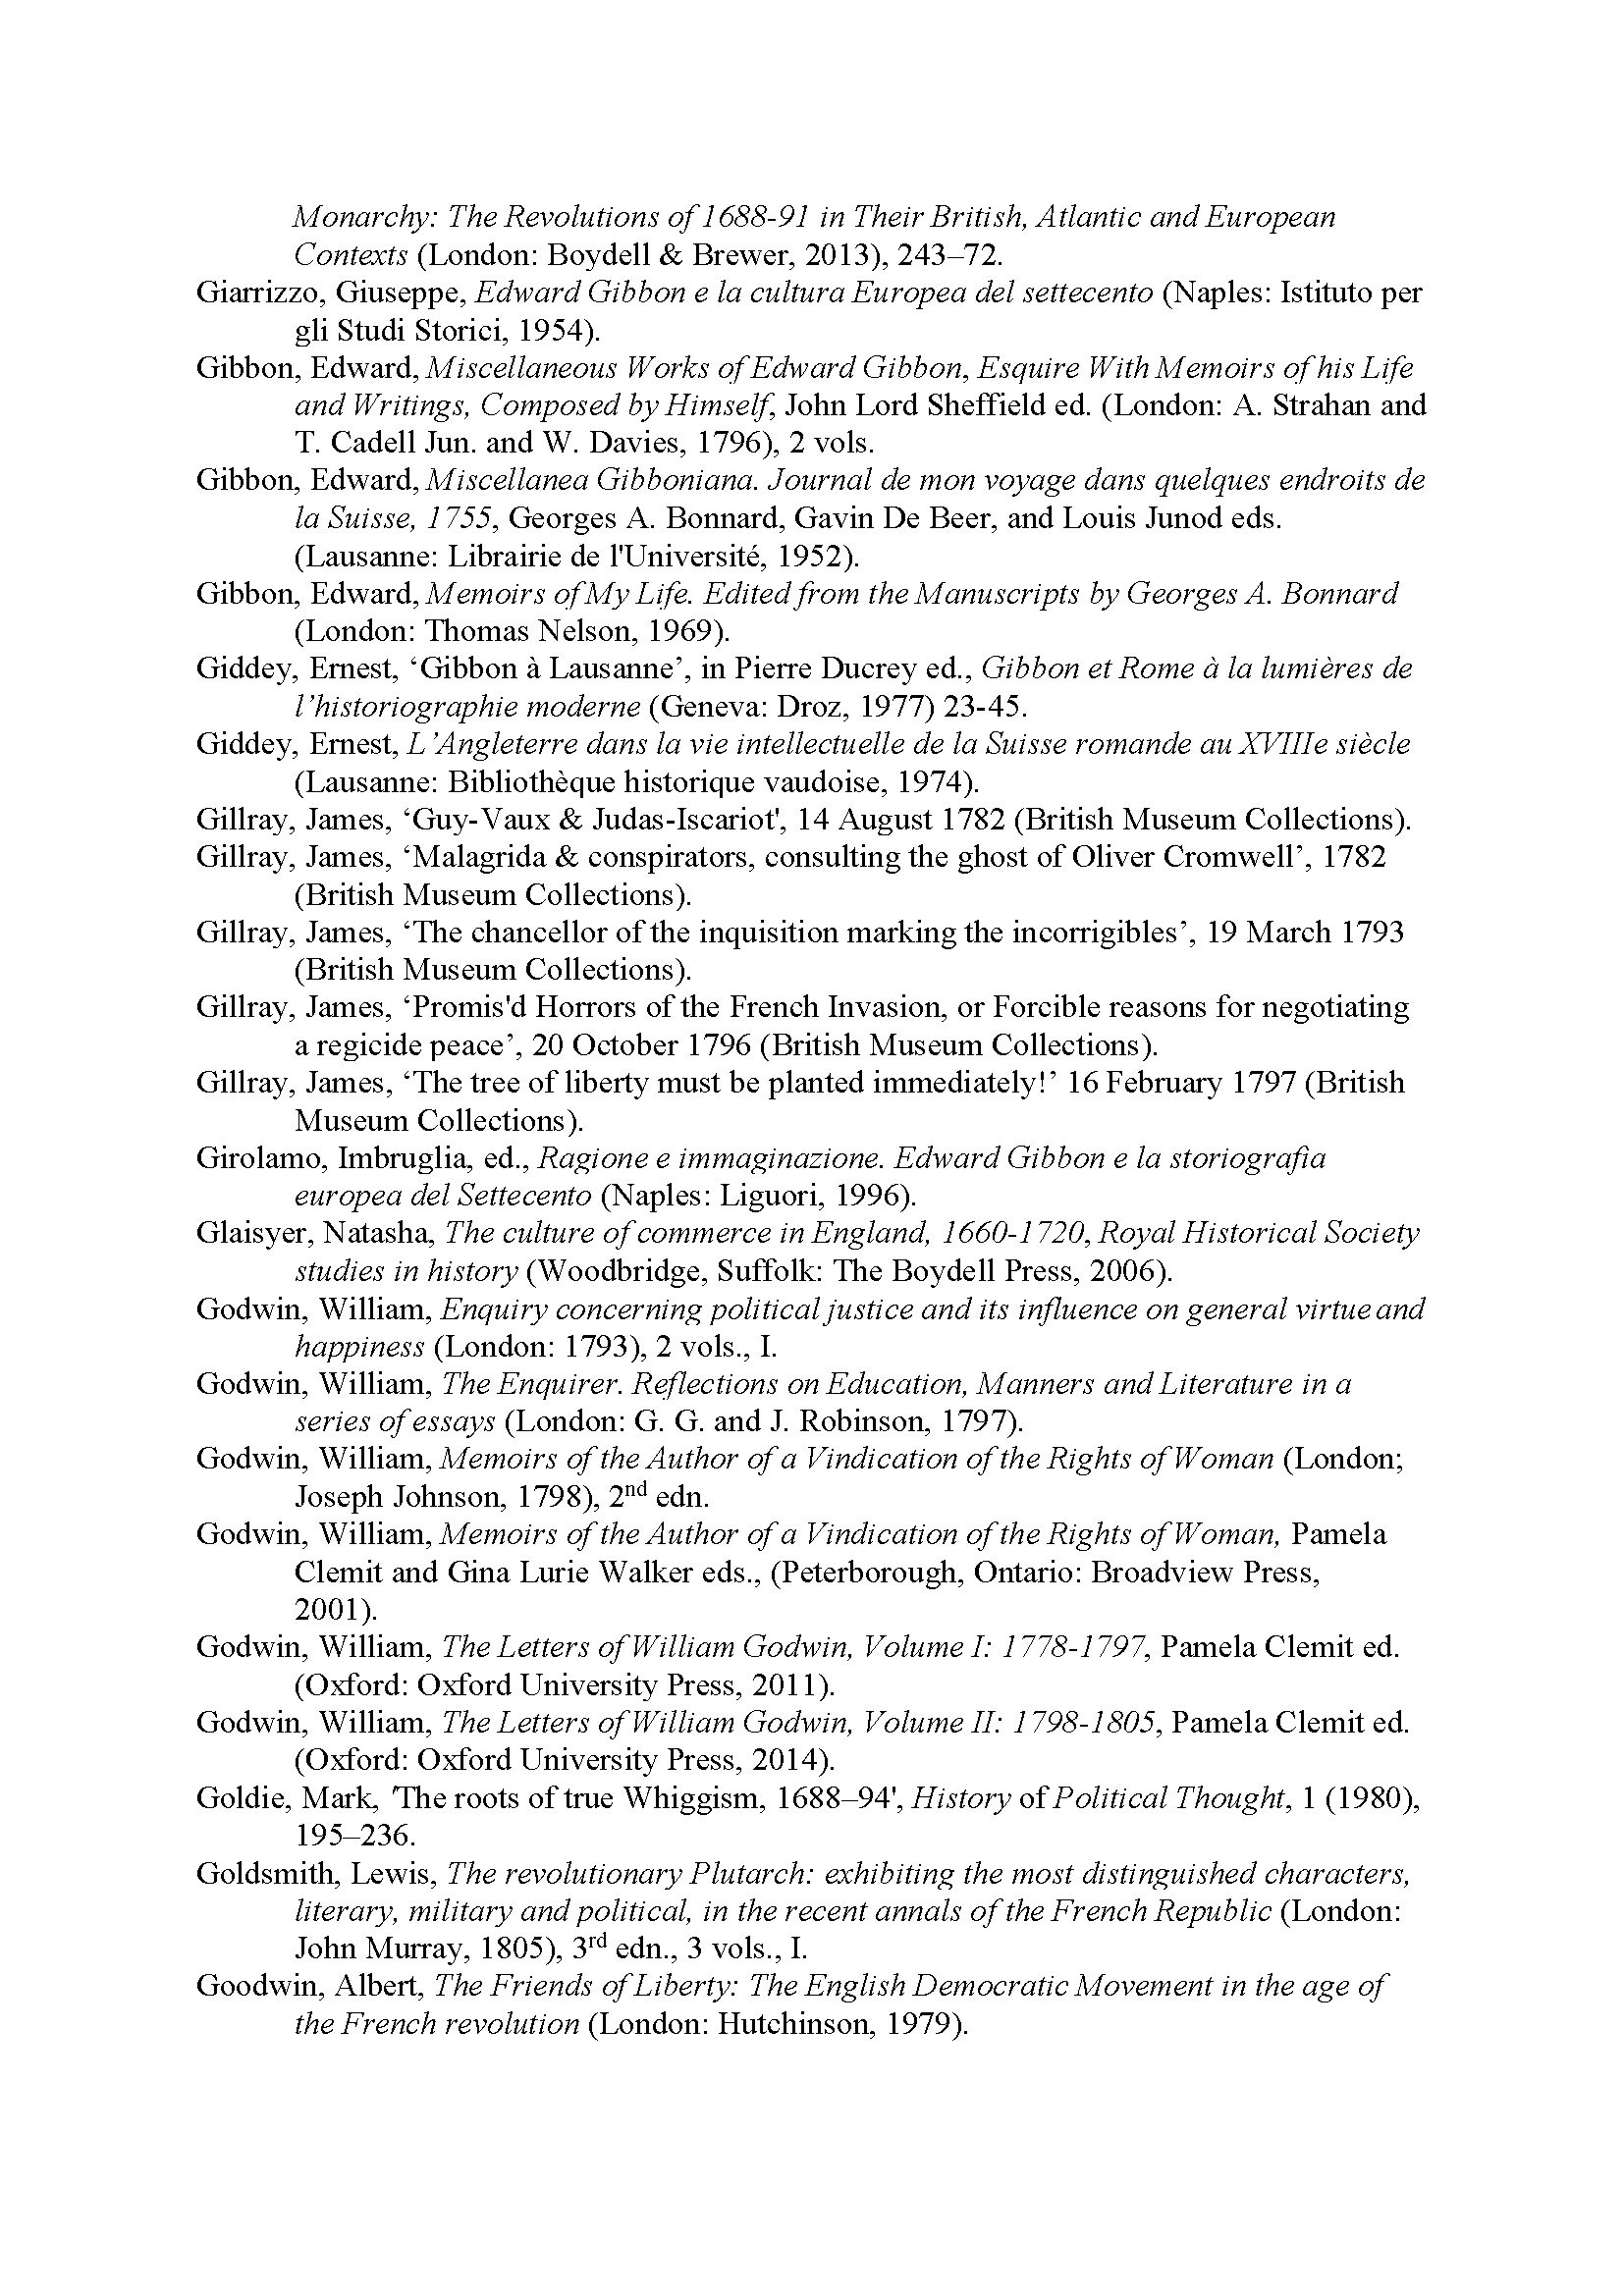 End of the Enlightment_Bibliography[25]_Page_17.jpg